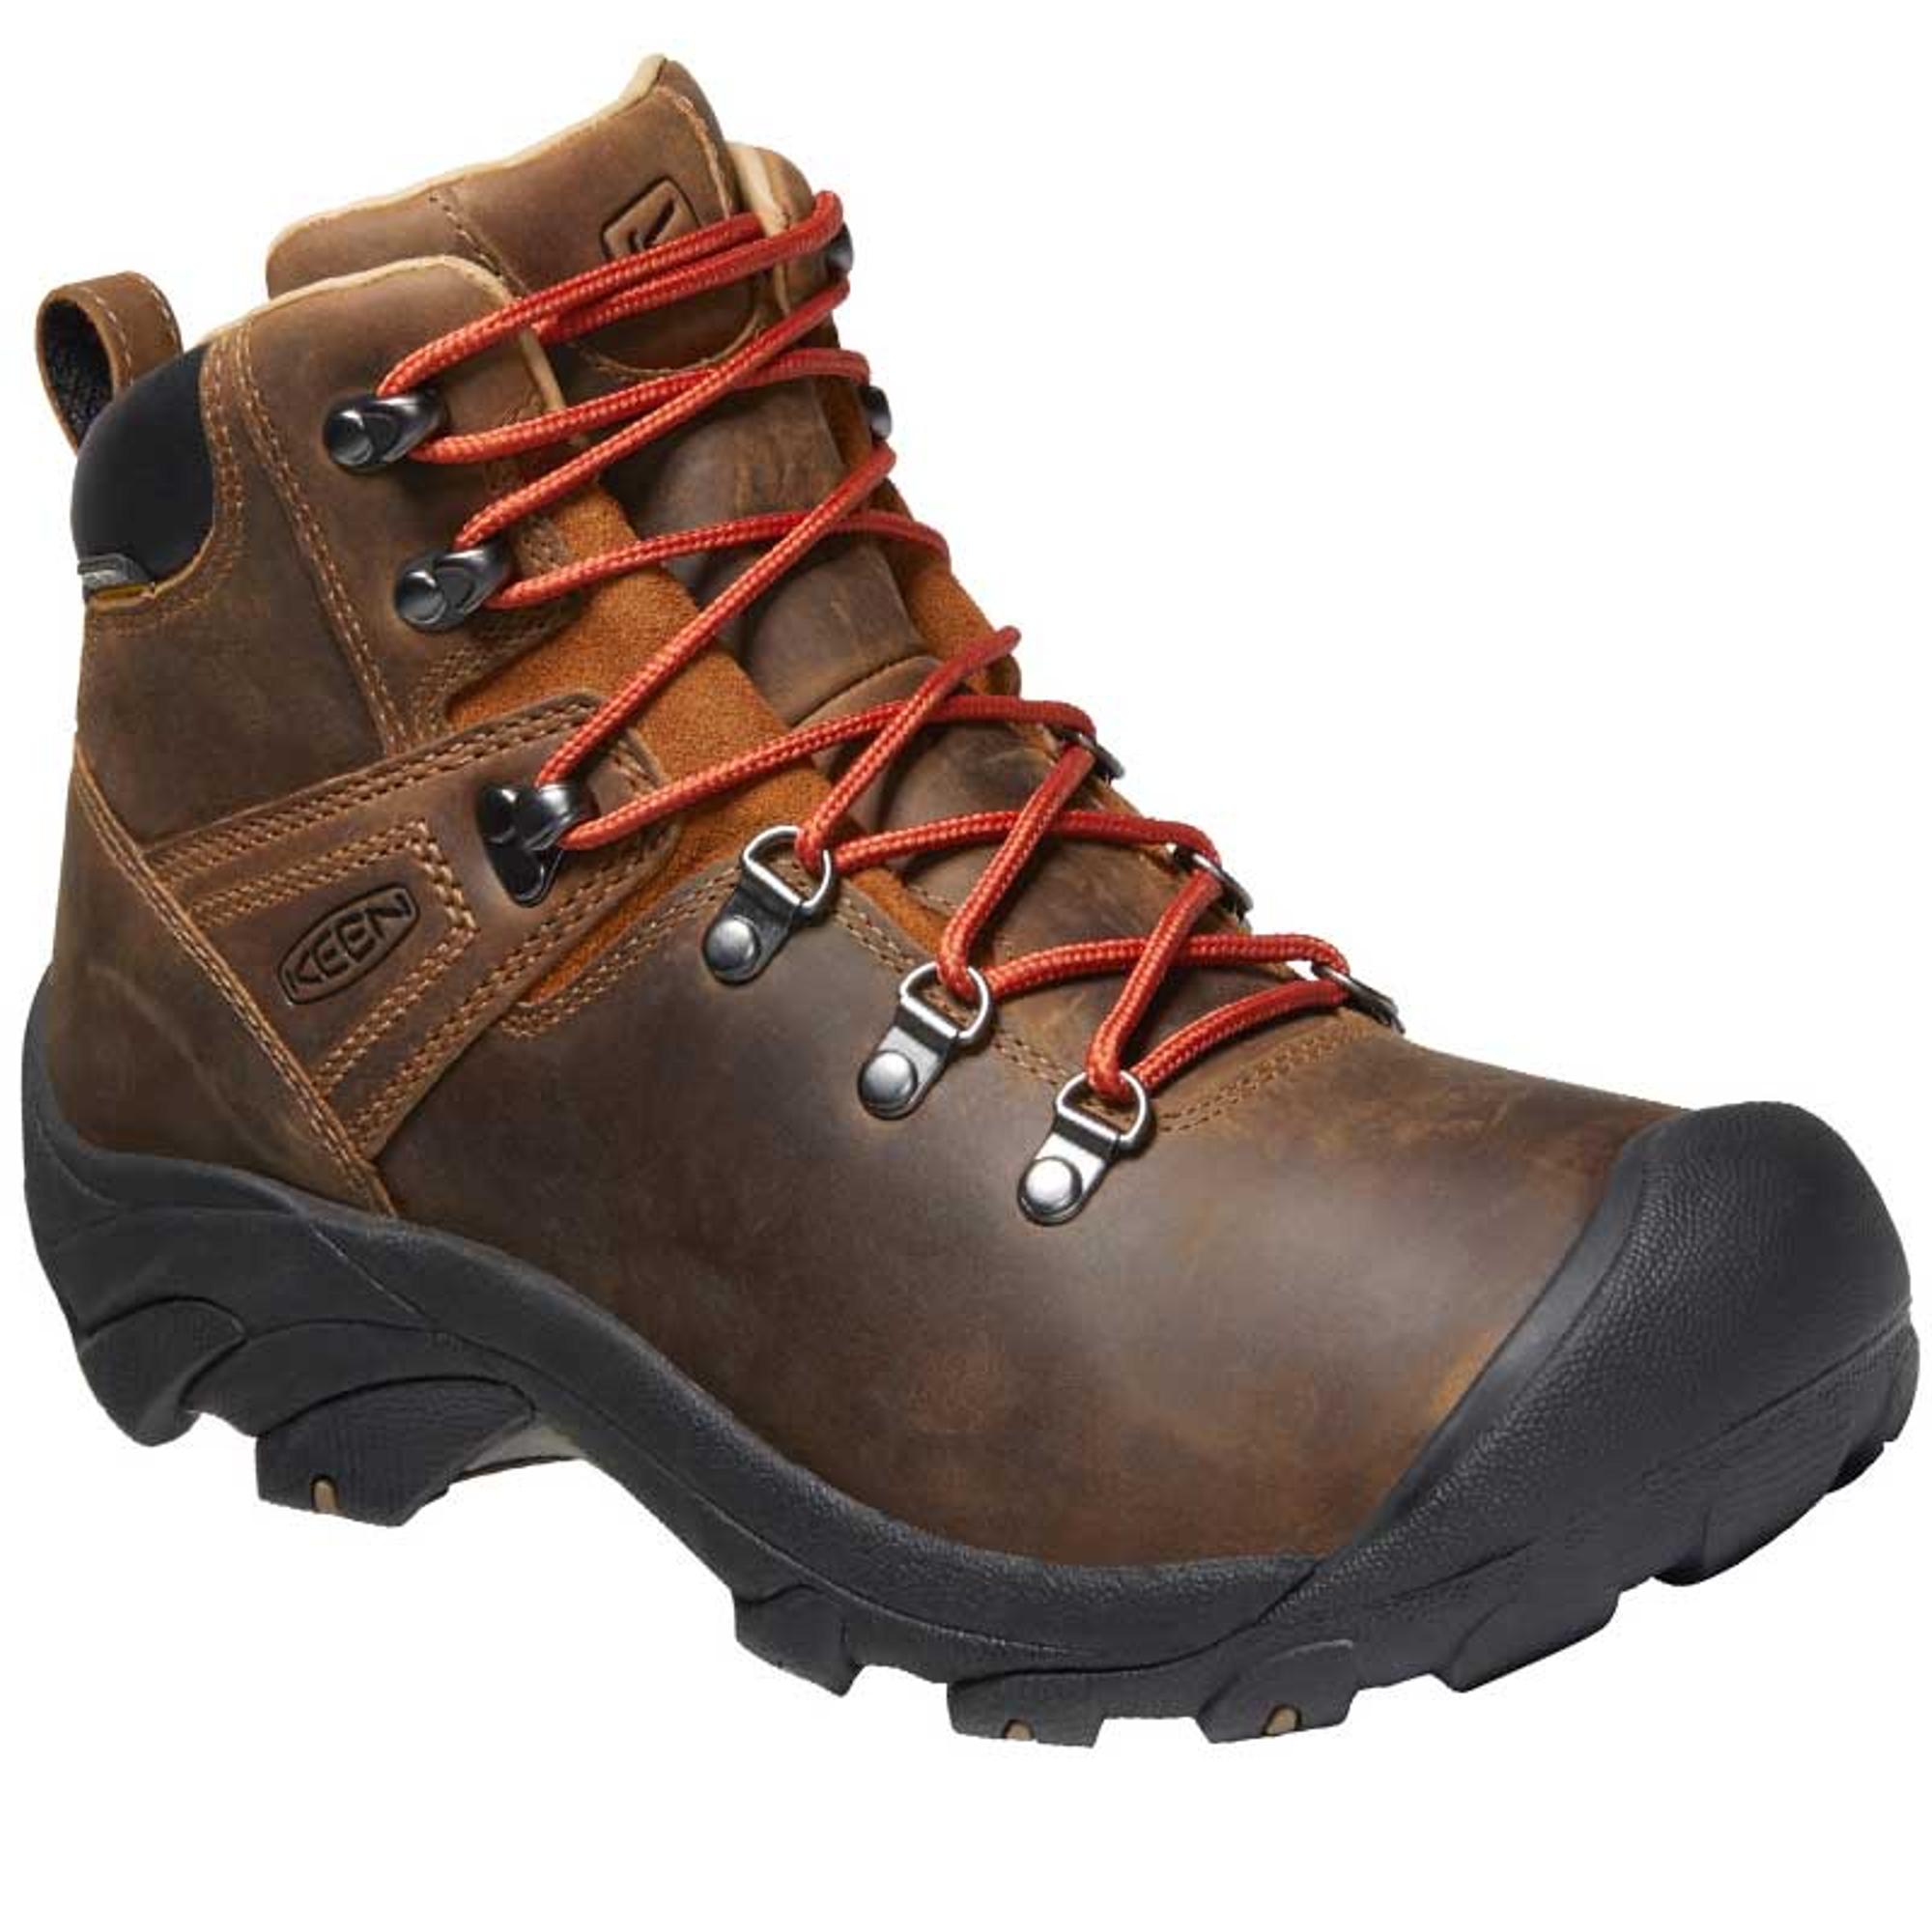 Pyrenees Syrup Lace Up Boots